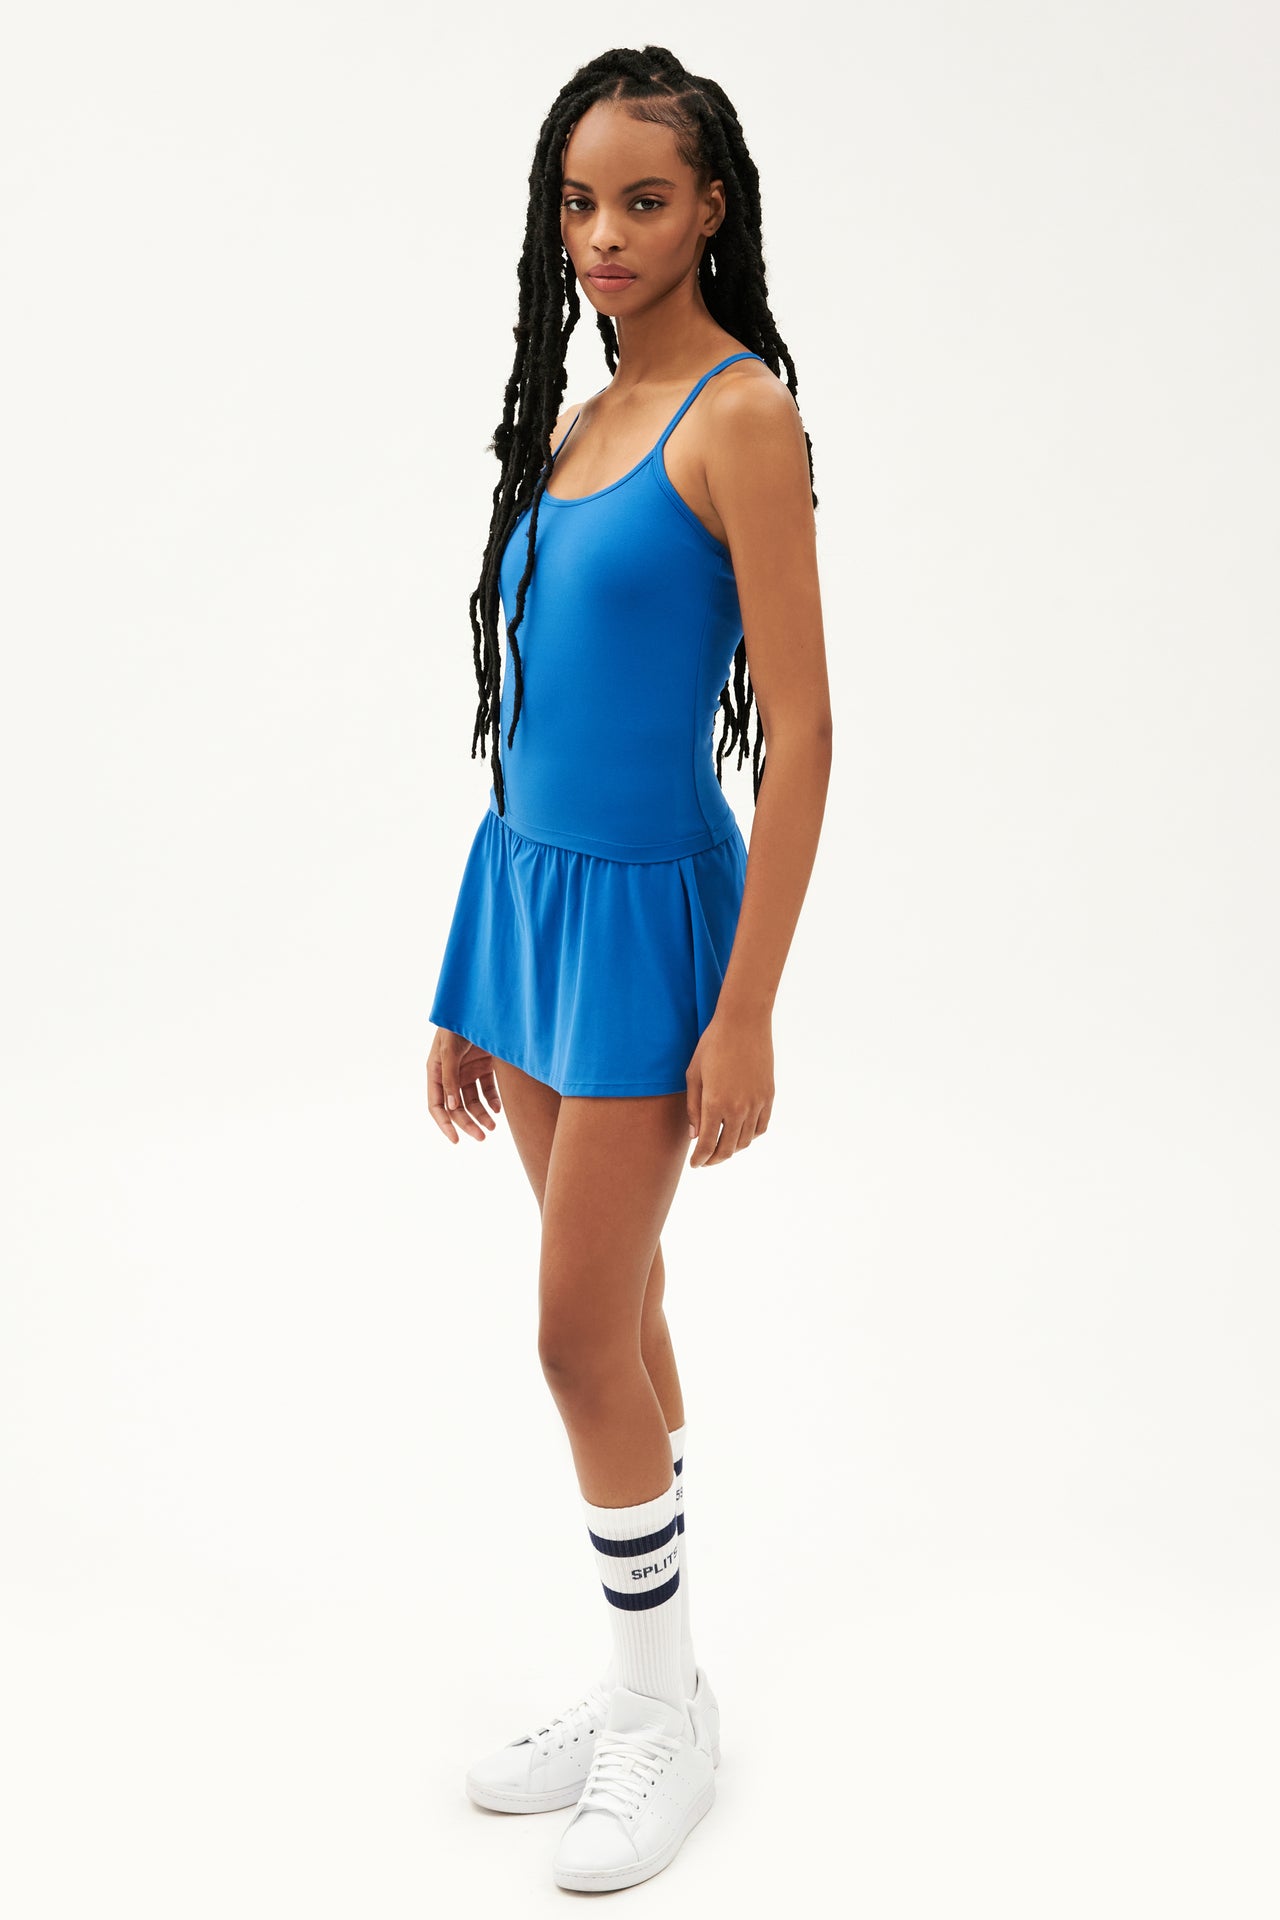 Full side view of girl wearing blue spaghetti strap tank top with blue skirt and white shoes